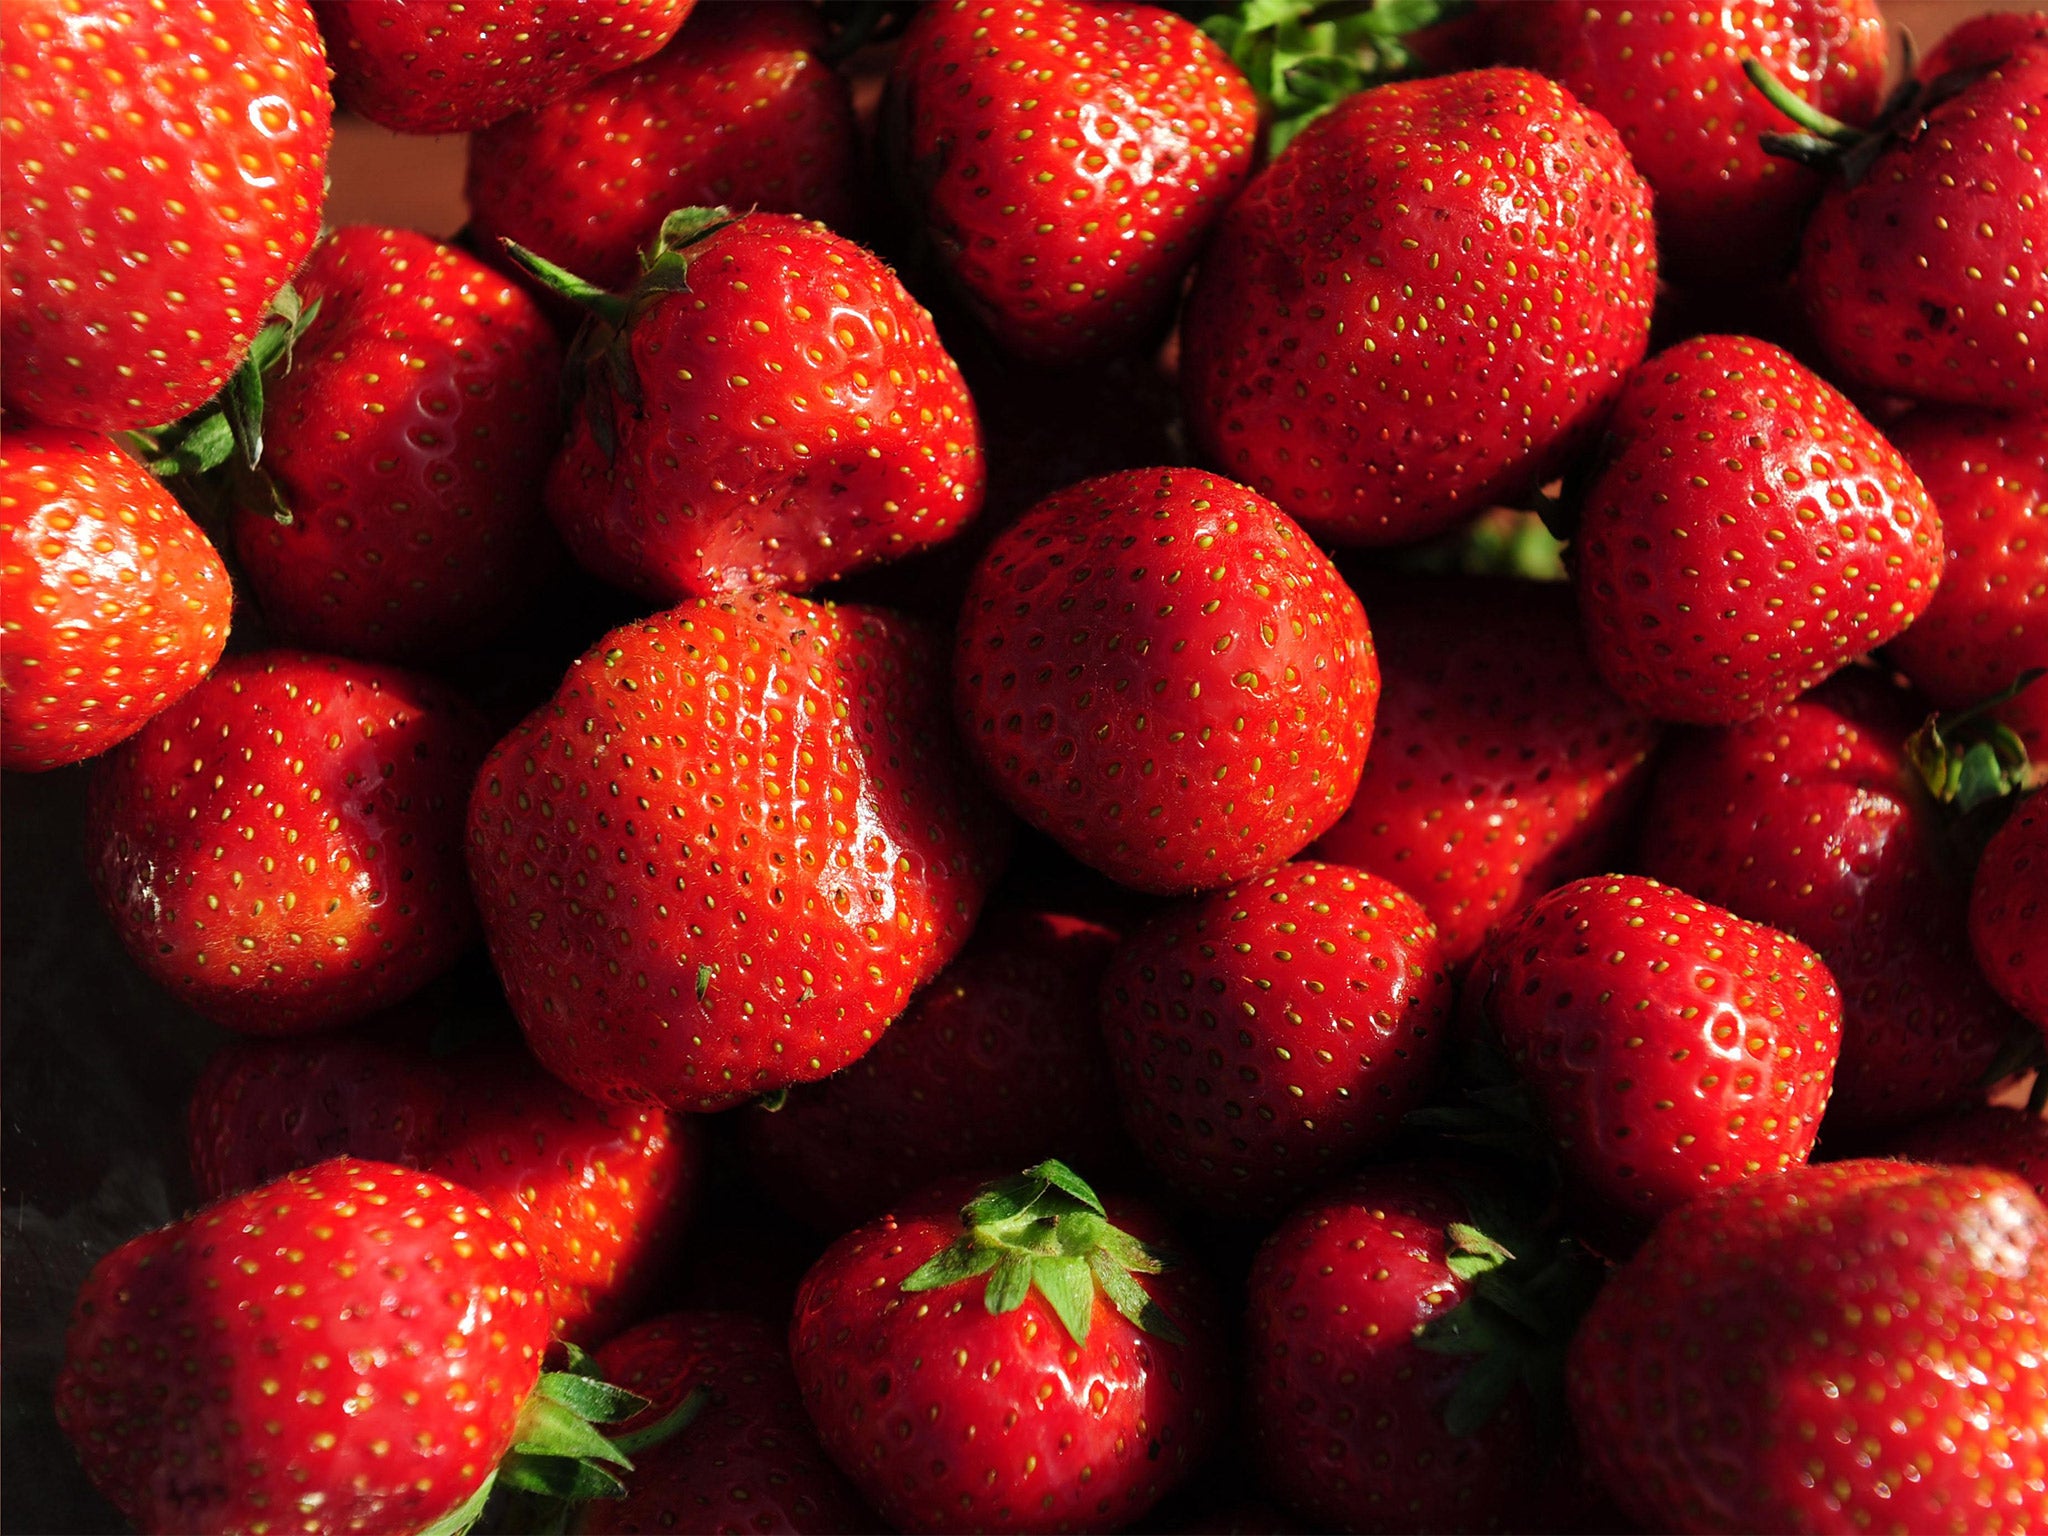 Polytunnels and the increased use of glasshouses have been crucial to extending the British strawberry season